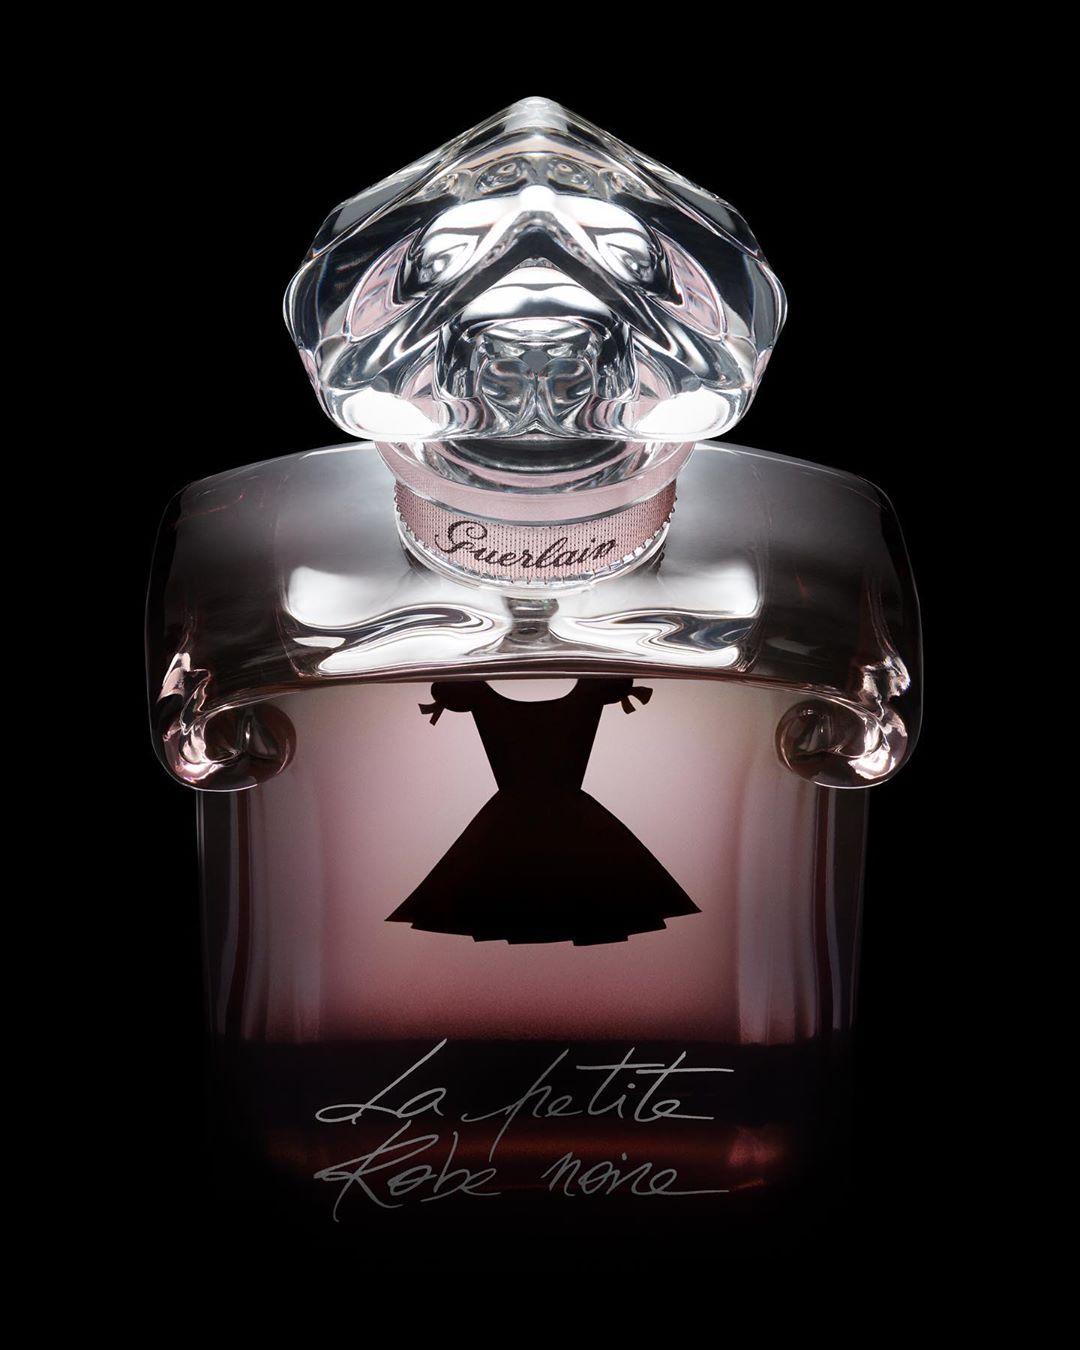 Guerlain - A timeless fragrance with a modern twist, Guerlain's iconic "heart-shaped" bottle has been boldly reinterpreted in order to house La Petite Robe Noire. Fading from black to powdery pink, th...